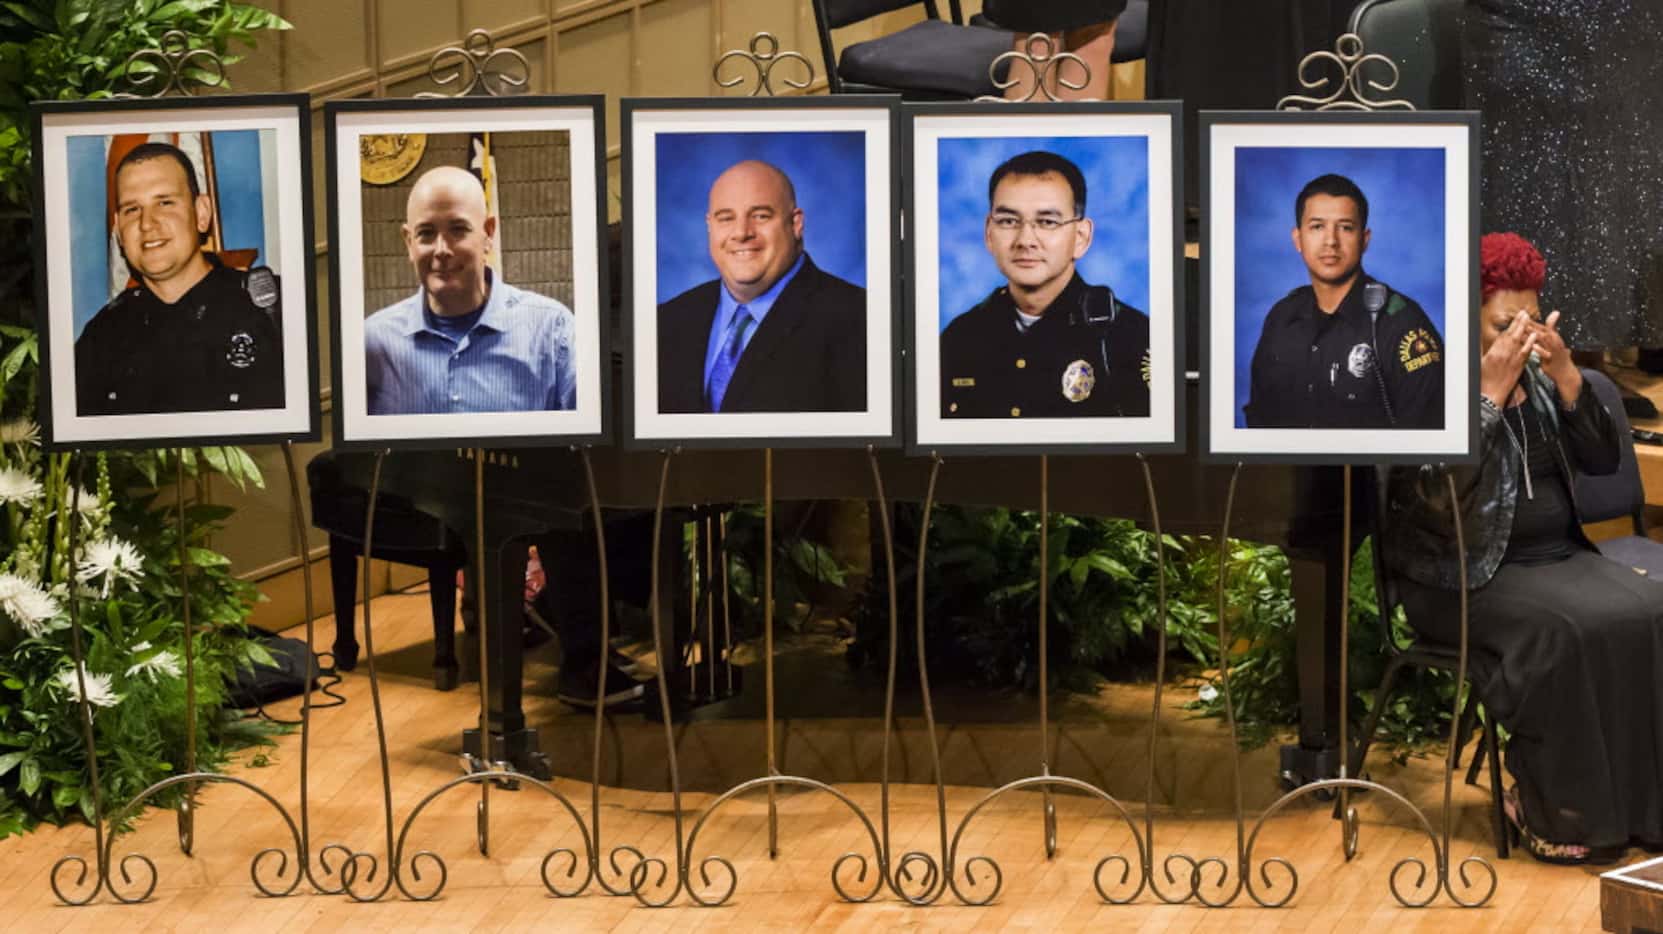 Photos of five officers who died were displayed during during an interfaith memorial service...